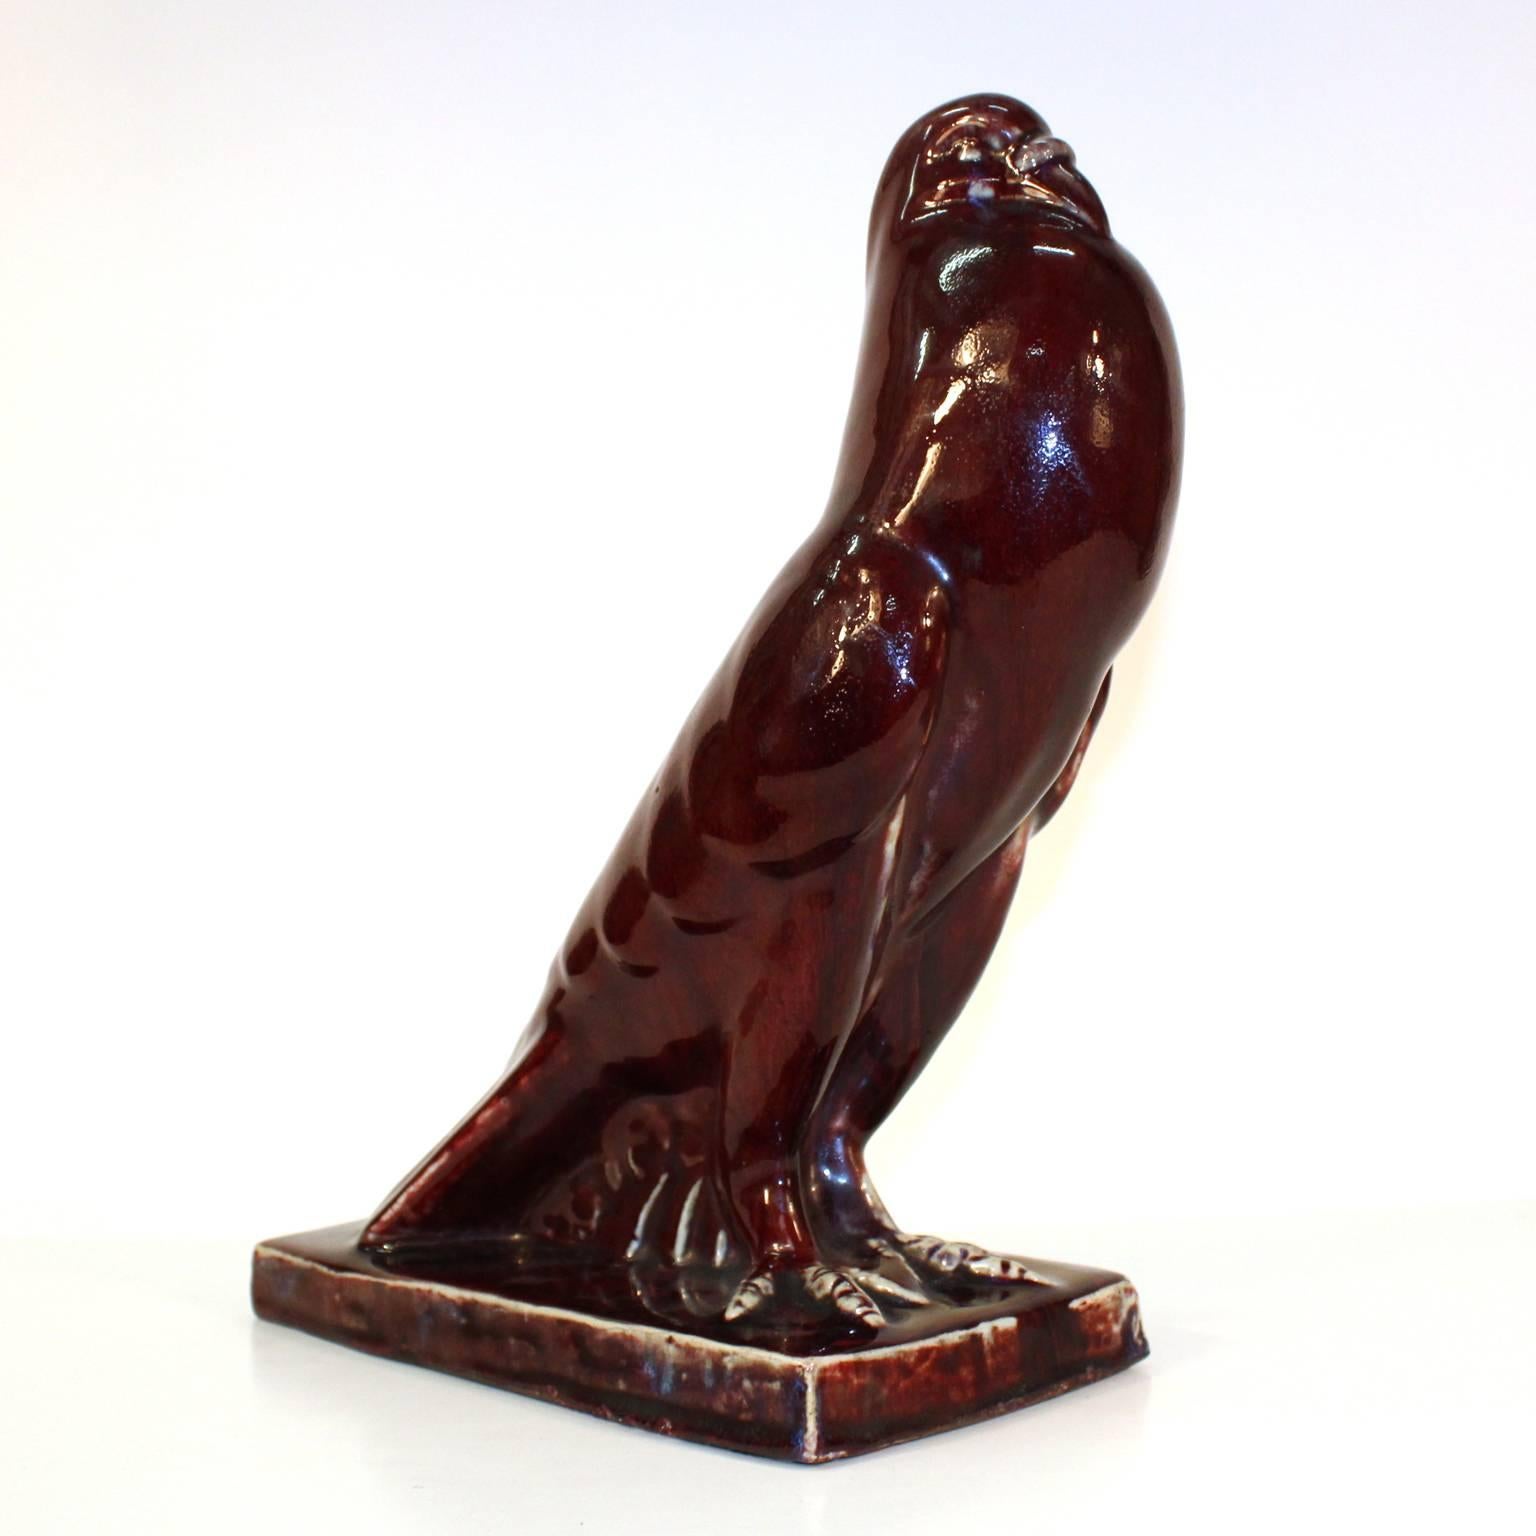 An Art Deco ceramic sculpture with ox blood colored glaze depicting a dove. Made in the 1920s-1930s in Japan for the French market. Excellent condition with paper label in Japanese; import piece. Japanese artist.